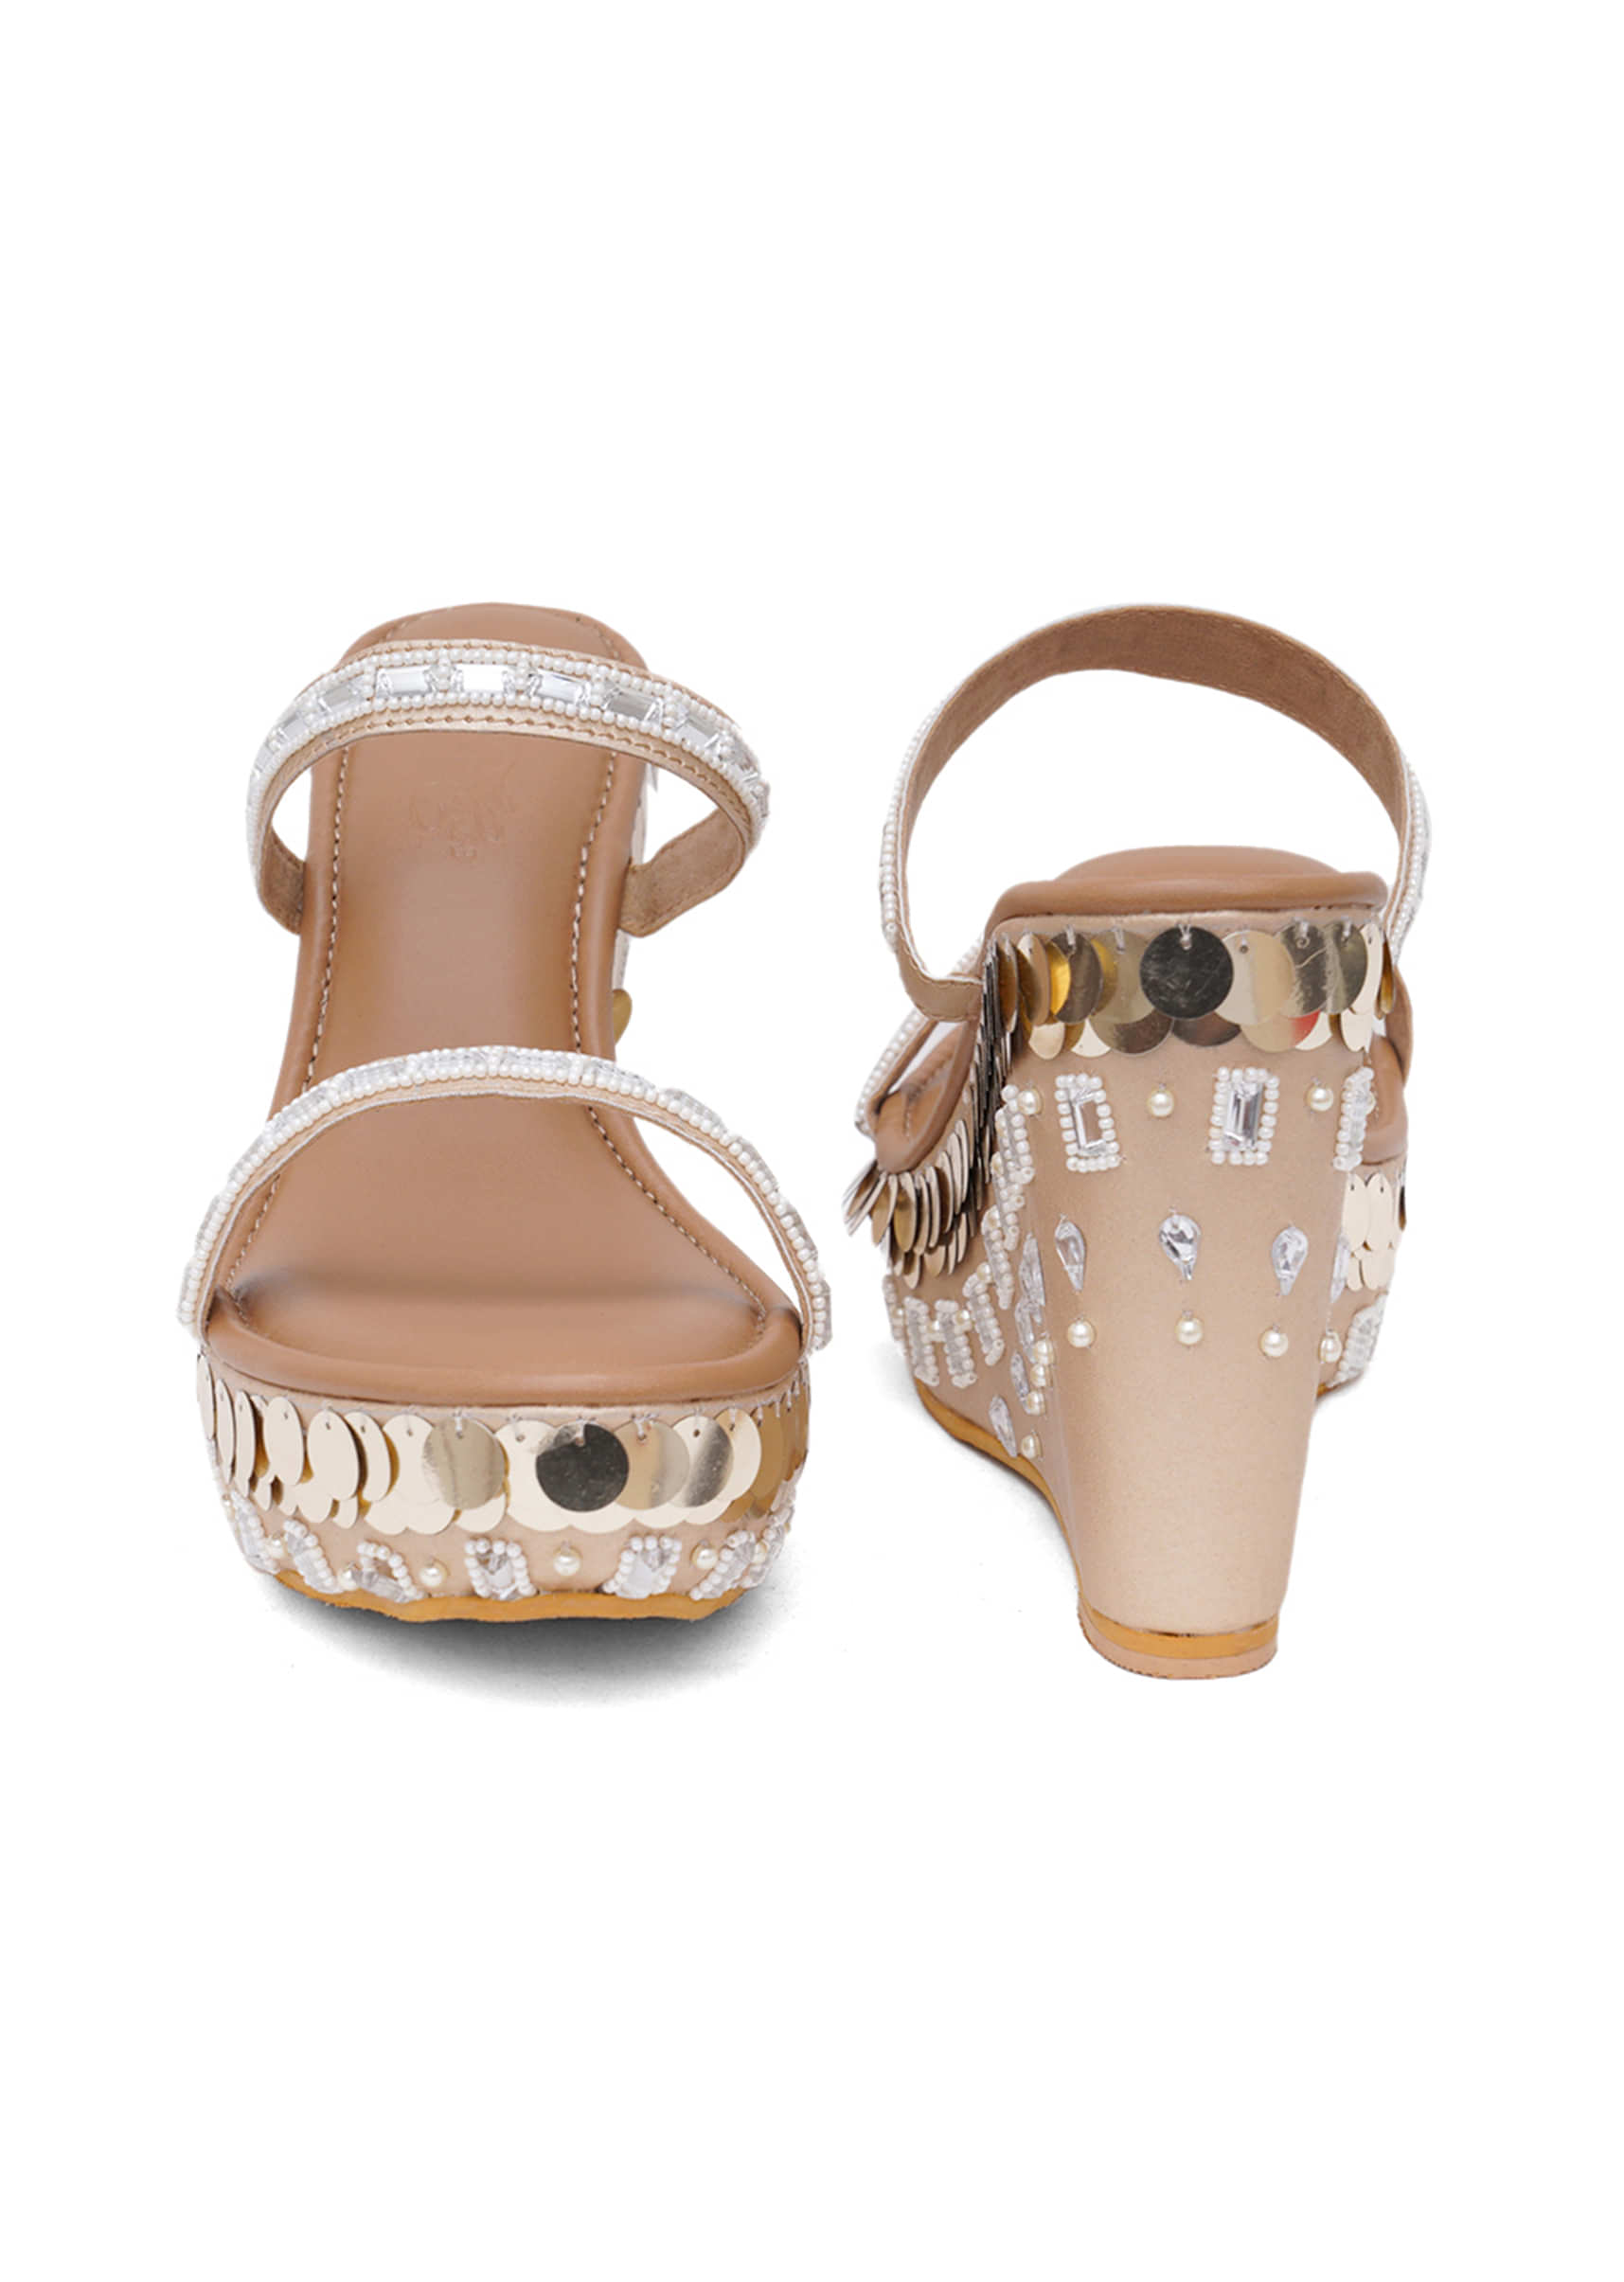 Beige Double Strap Rhinestone Wedges With Pearl Bead Embroidery